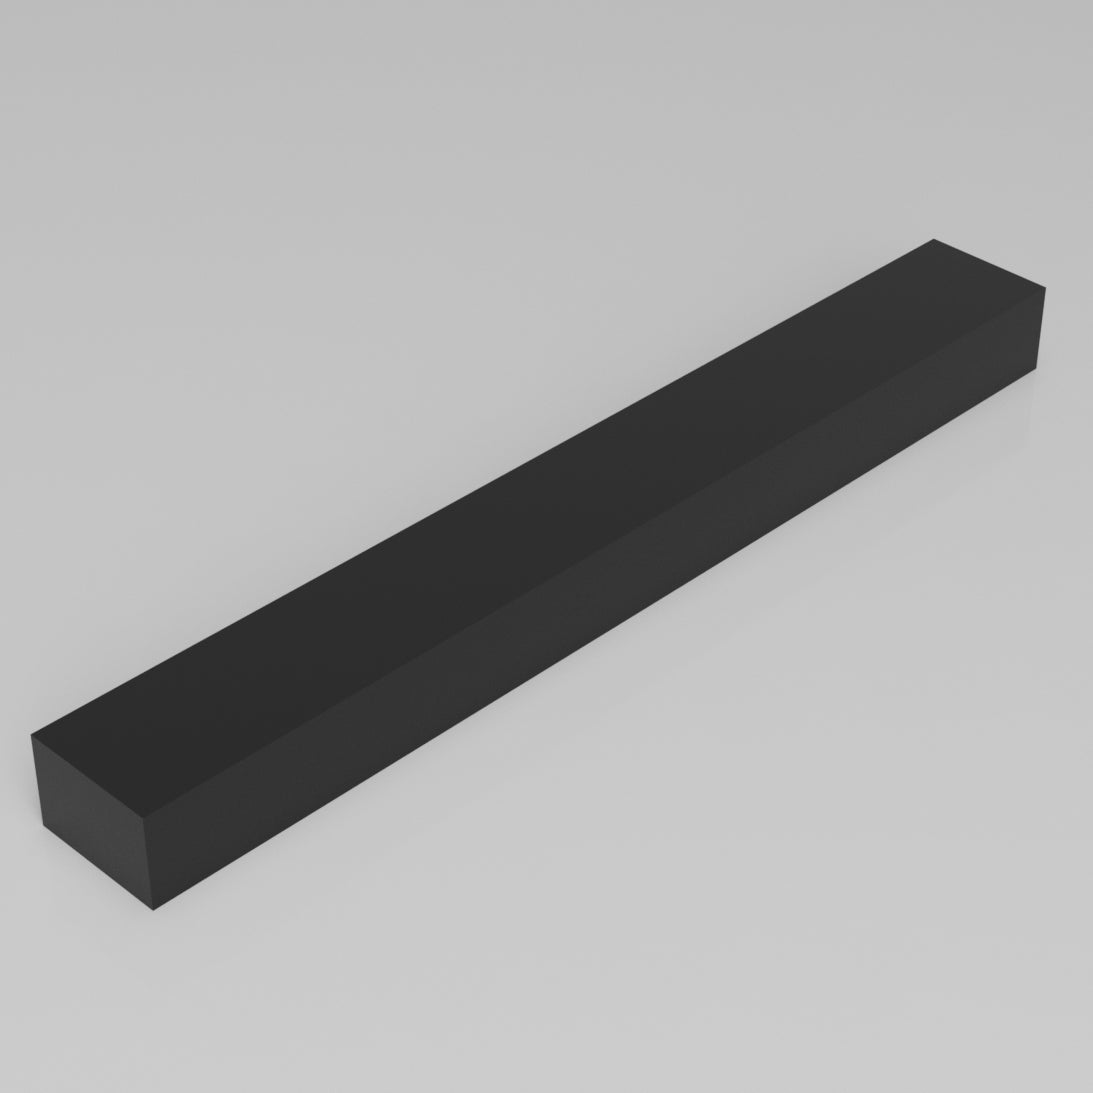 Machinable Wax Rectangular Block Front View 2 Inch by 3 Inch by 24 Inch